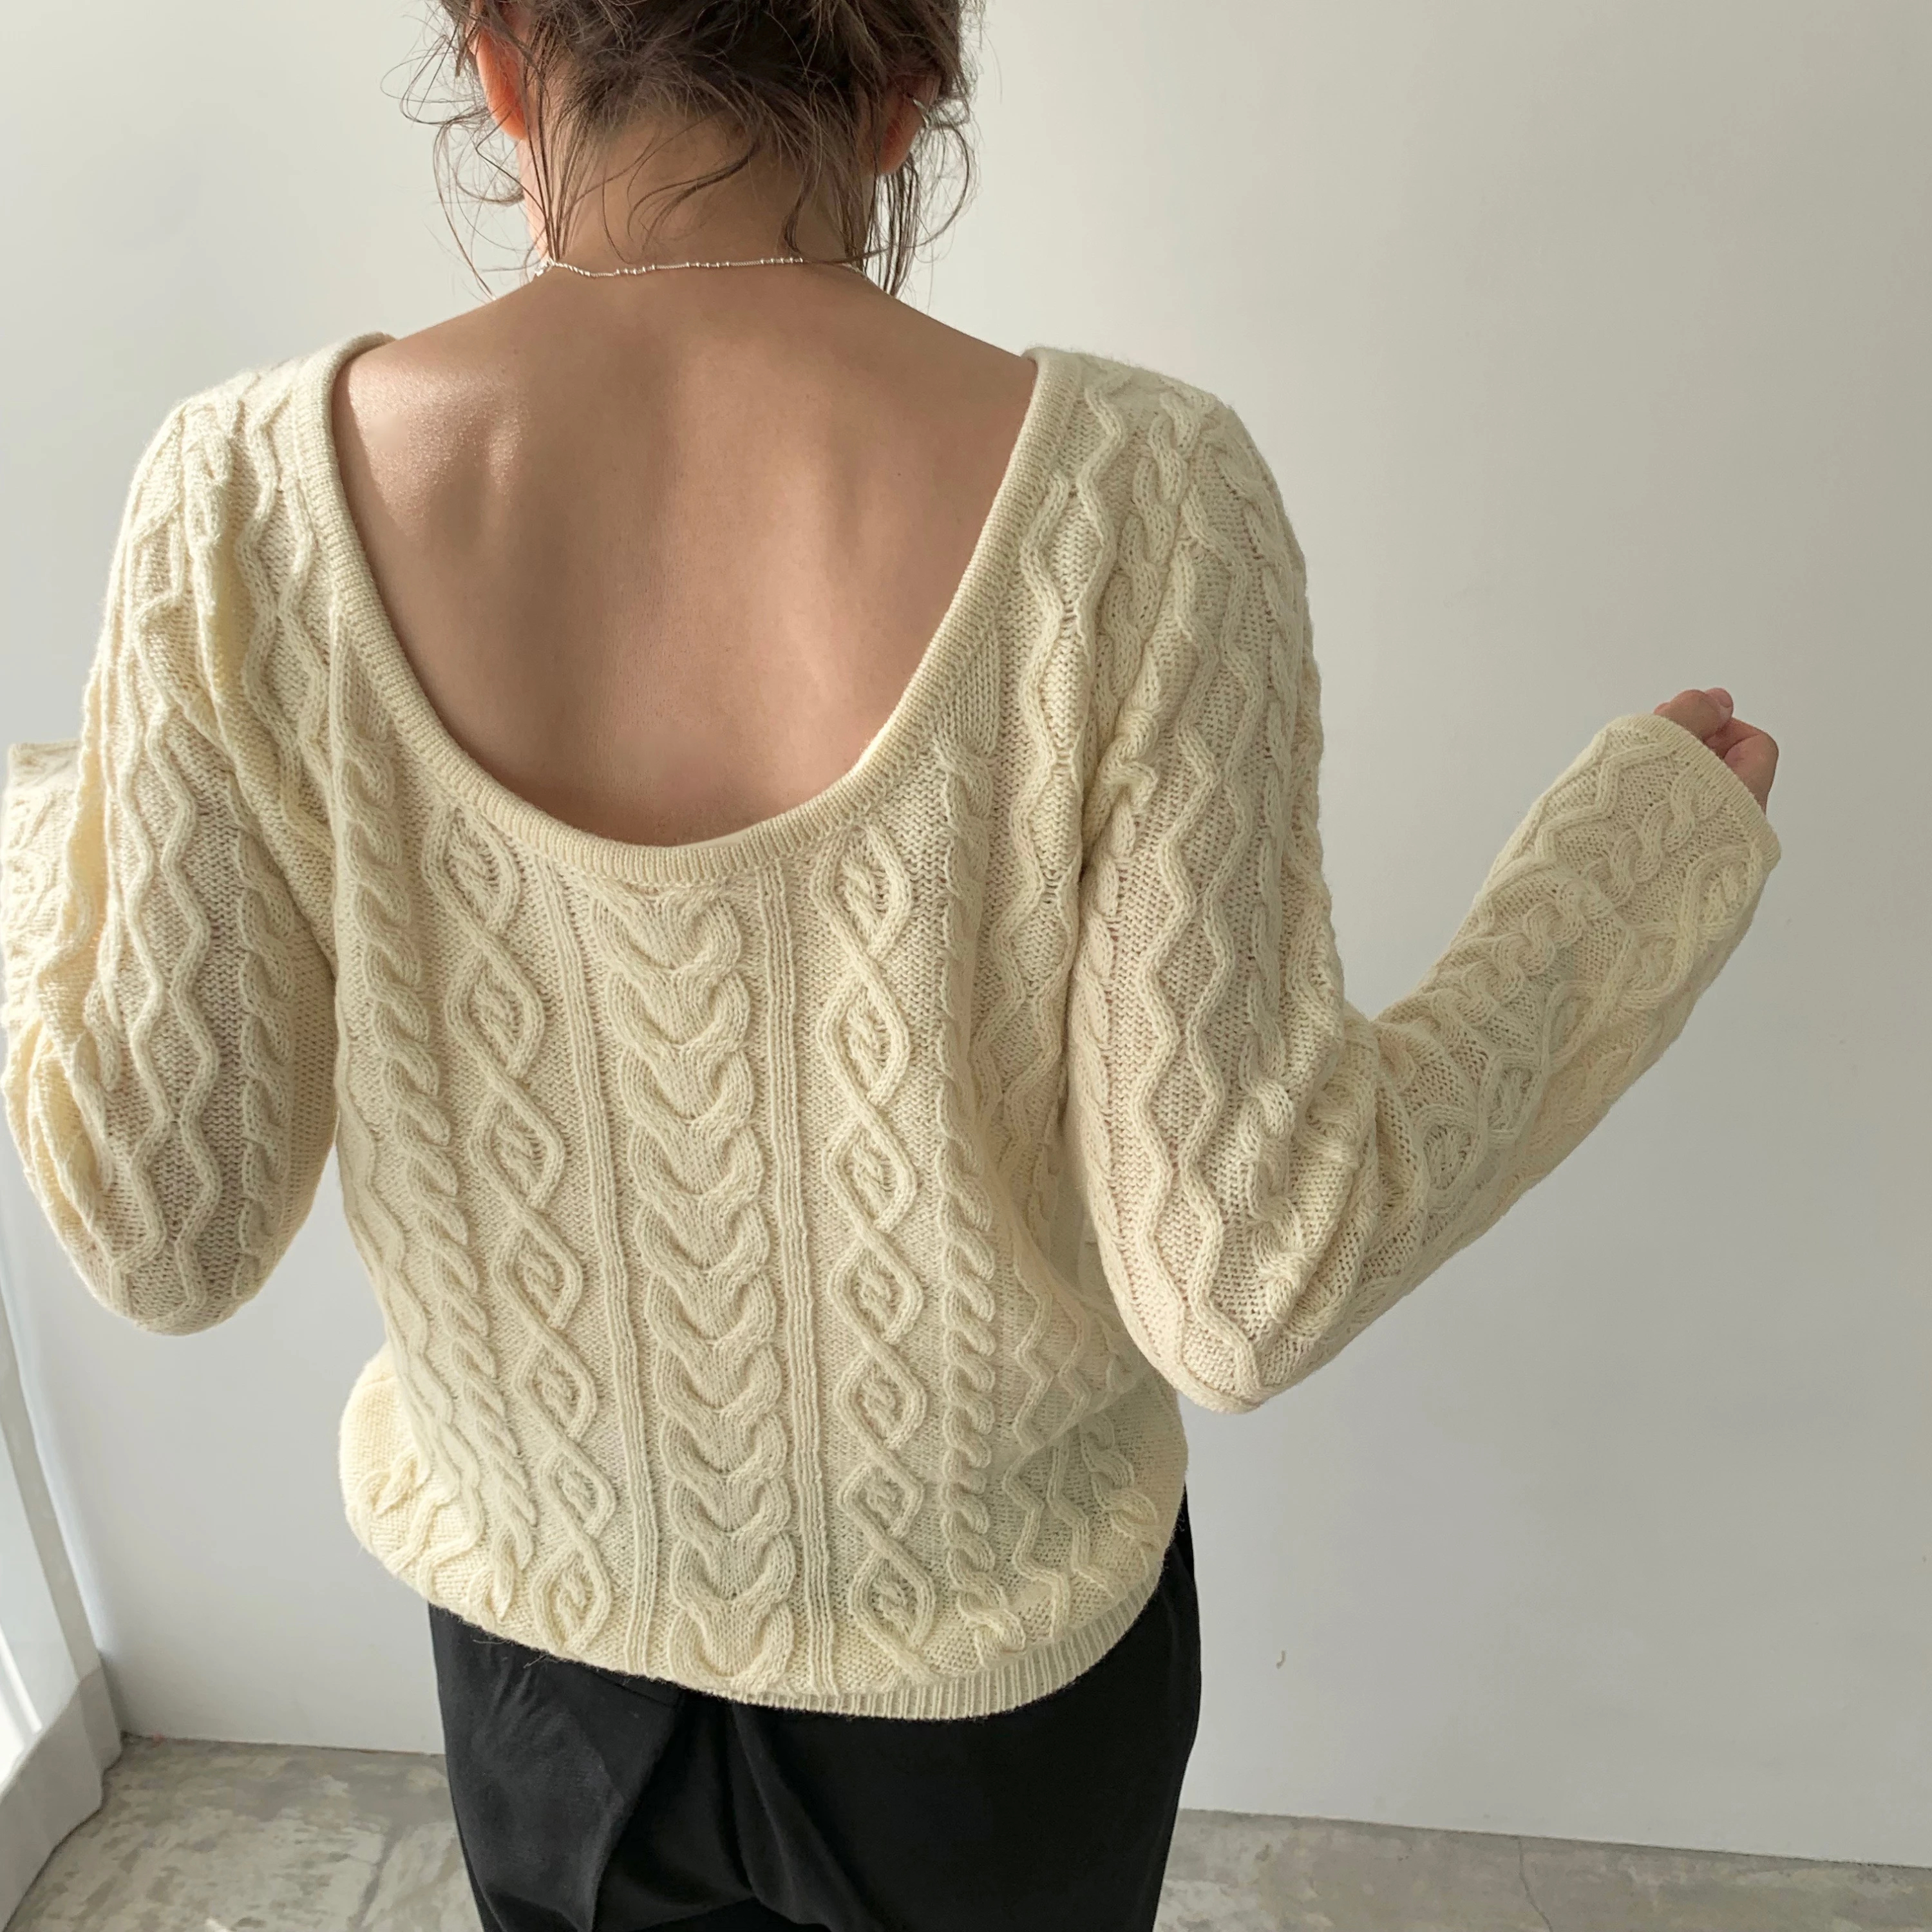 U back open full cable knit